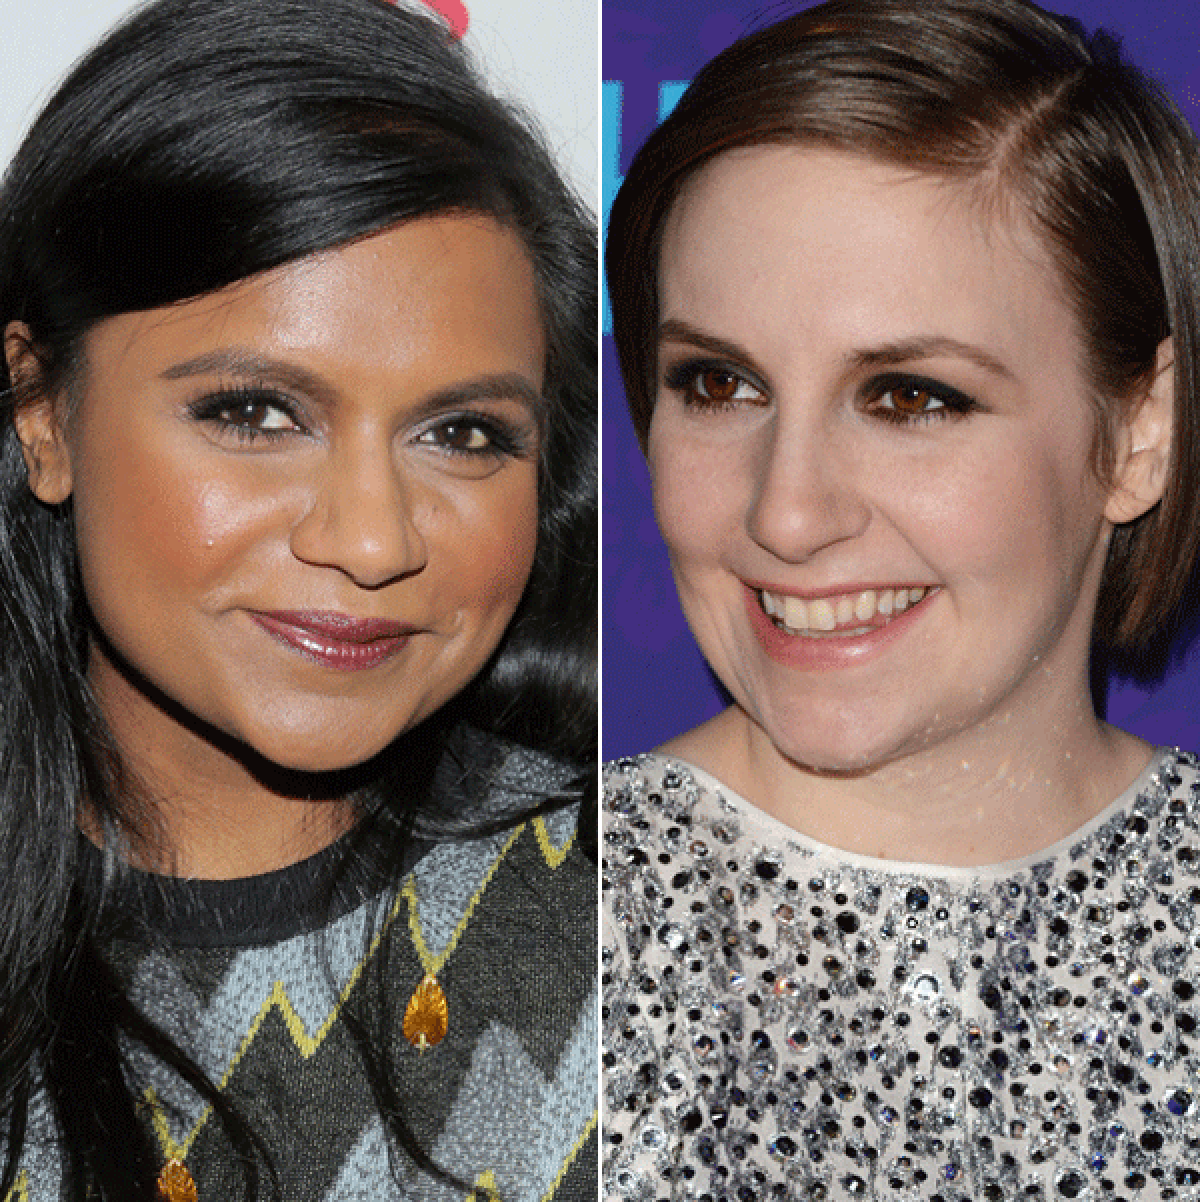 Mindy Kaling, left, seen at an event in Beverly Hills in November, is on the cover of Elle's 2014 "Women in TV" issue. Lena Dunham will reportedly appear on the cover of Vogue's February issue. She is seen at the season three premiere of "Girls" in New York on Jan. 6.